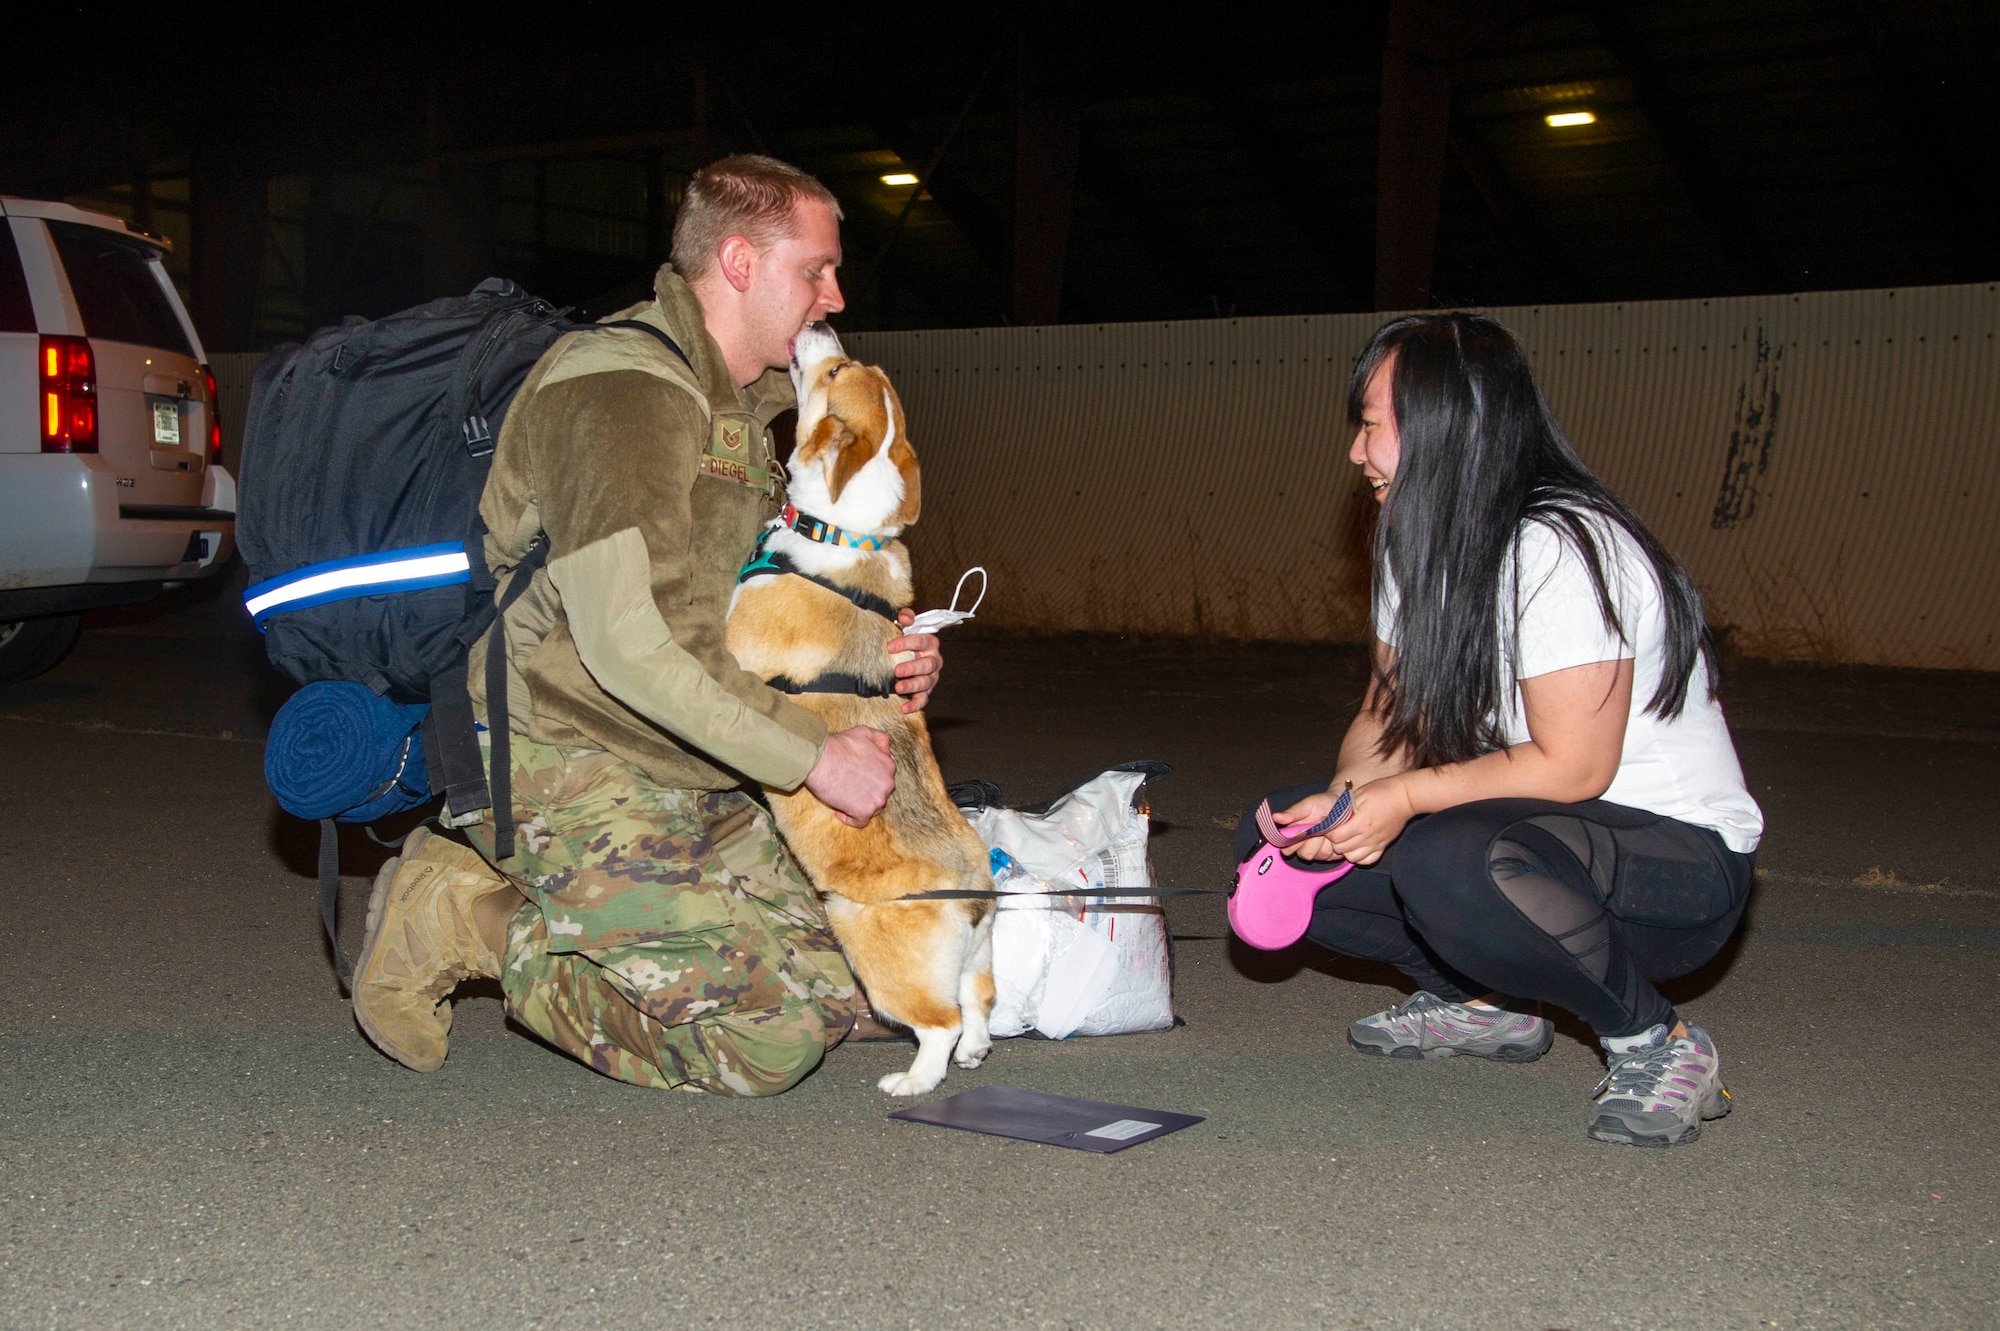 Tech. Sgt. David Diegel kneels with his wife, Mia Diegel, and hugs his dog, Cooper, June 14, 2020, at Beale Air Force Base, California.